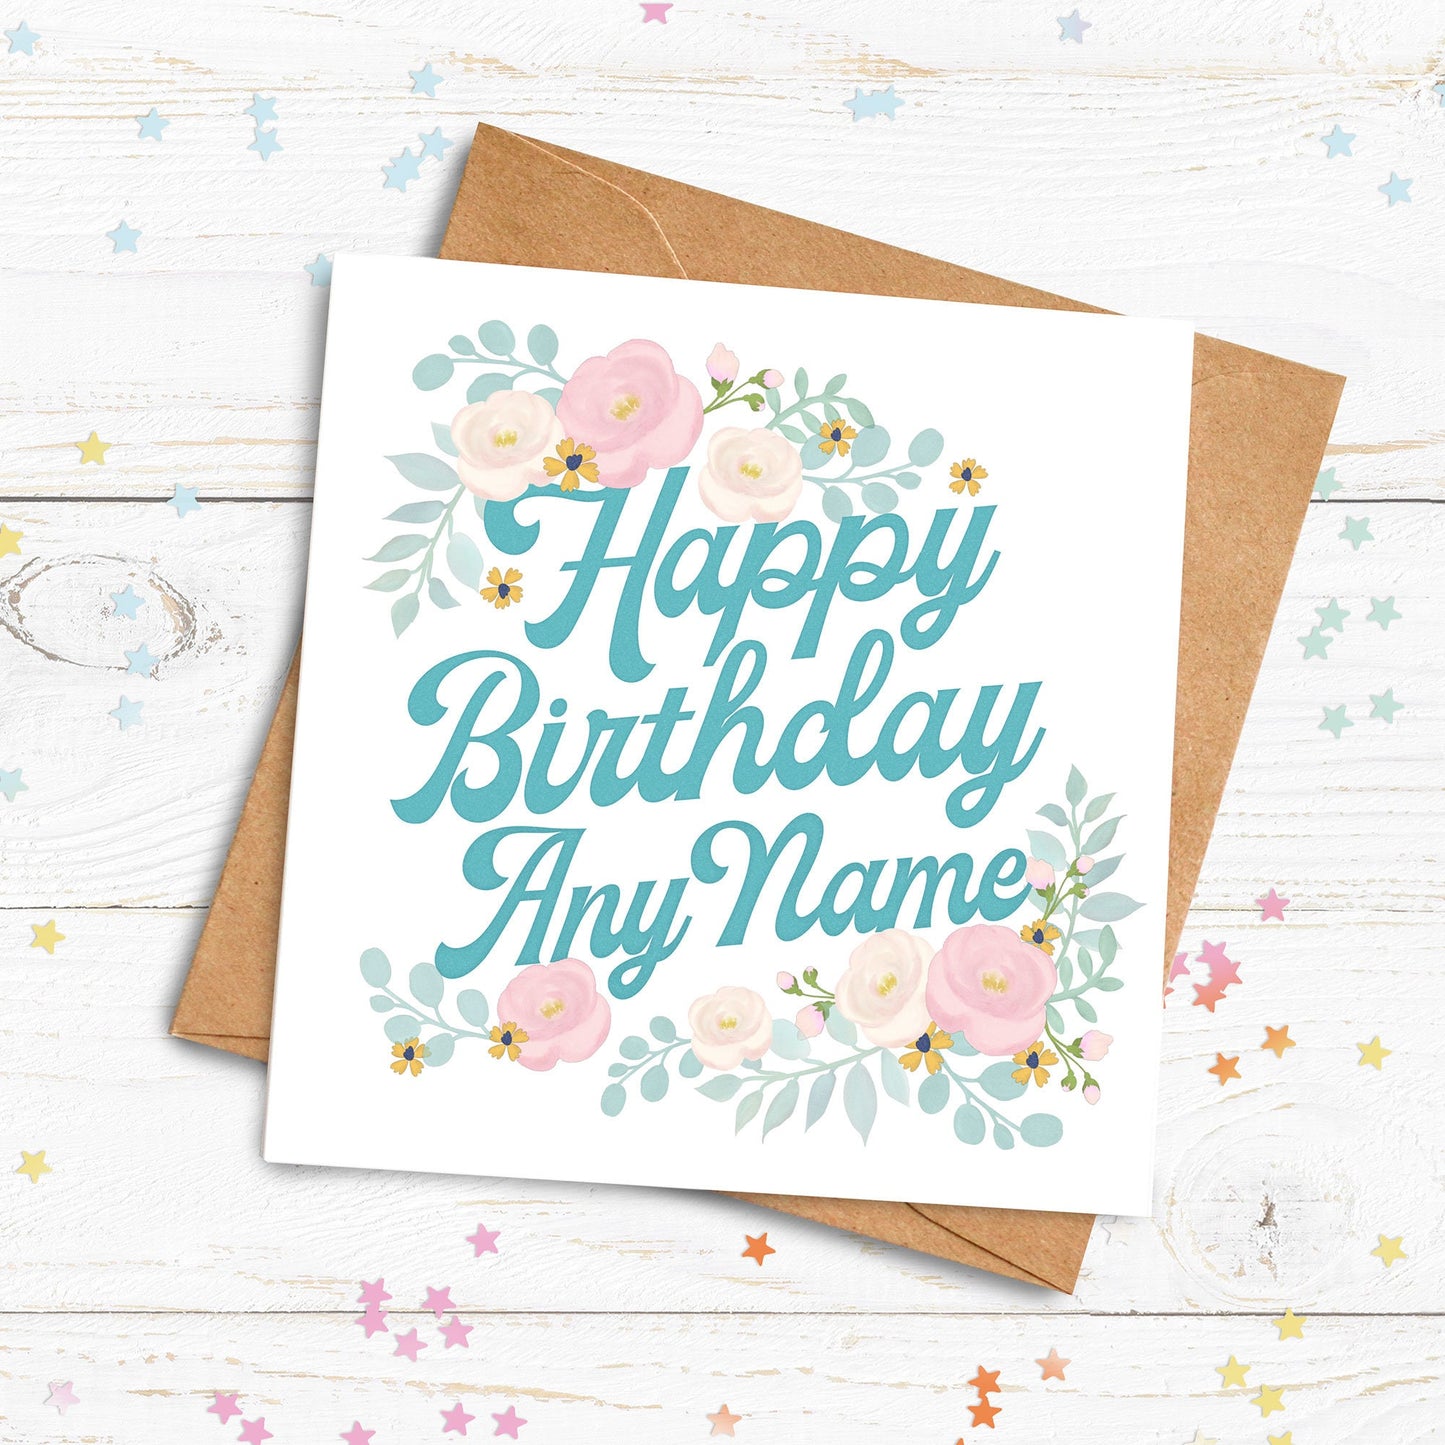 Happy Birthday To You Floral Card. For her Birthday Card. Floral Card. Greetings Card. Send Direct Option. Personalised Birthday Card.